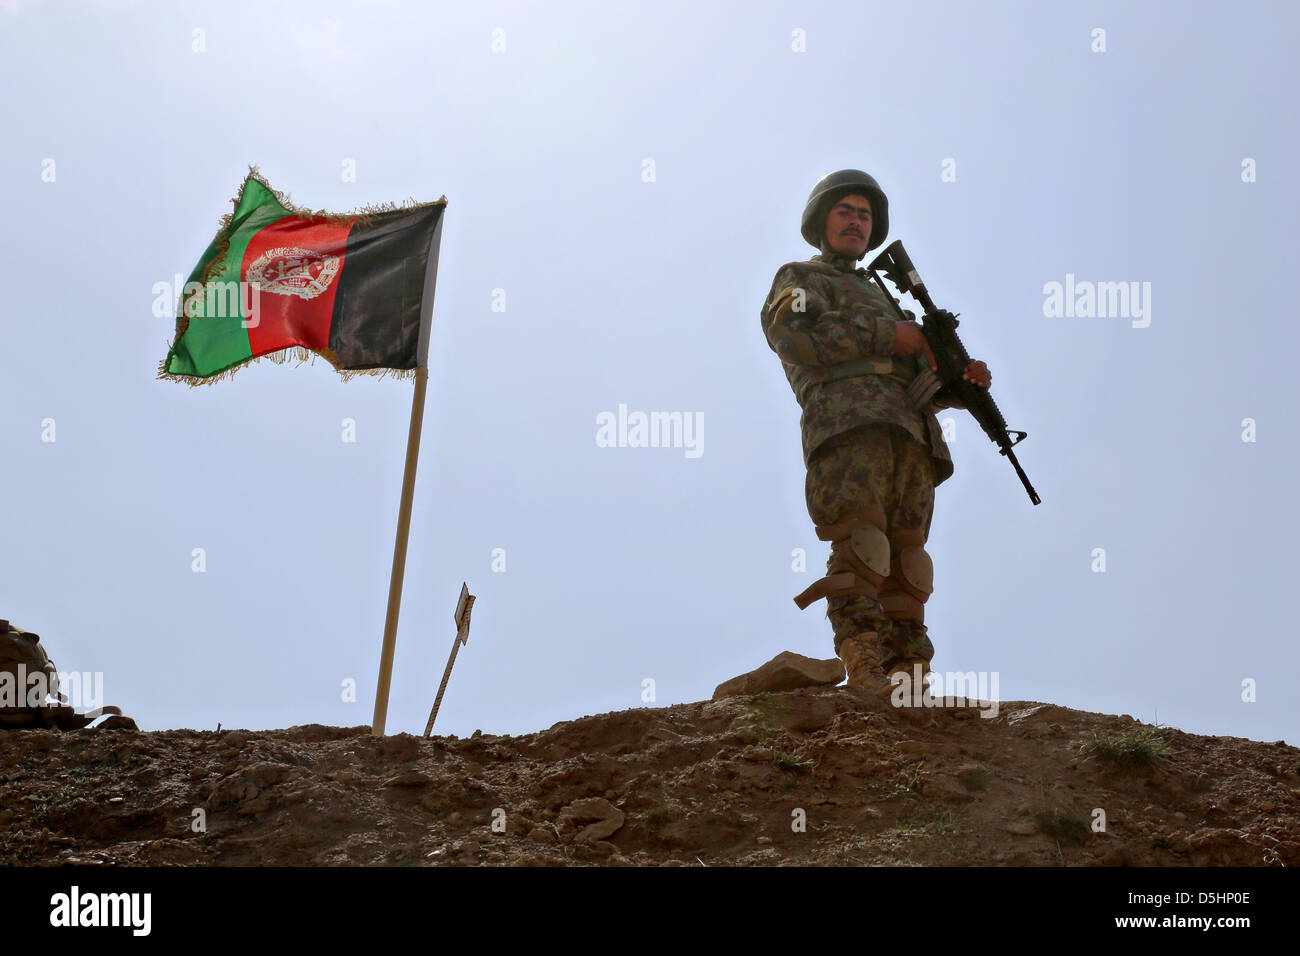 An Afghan National Army Special Forces soldier guards an Afghan flag at a weapons range March 18, 2013 in the Kabul district, Kabul province, Afghanistan Stock Photo